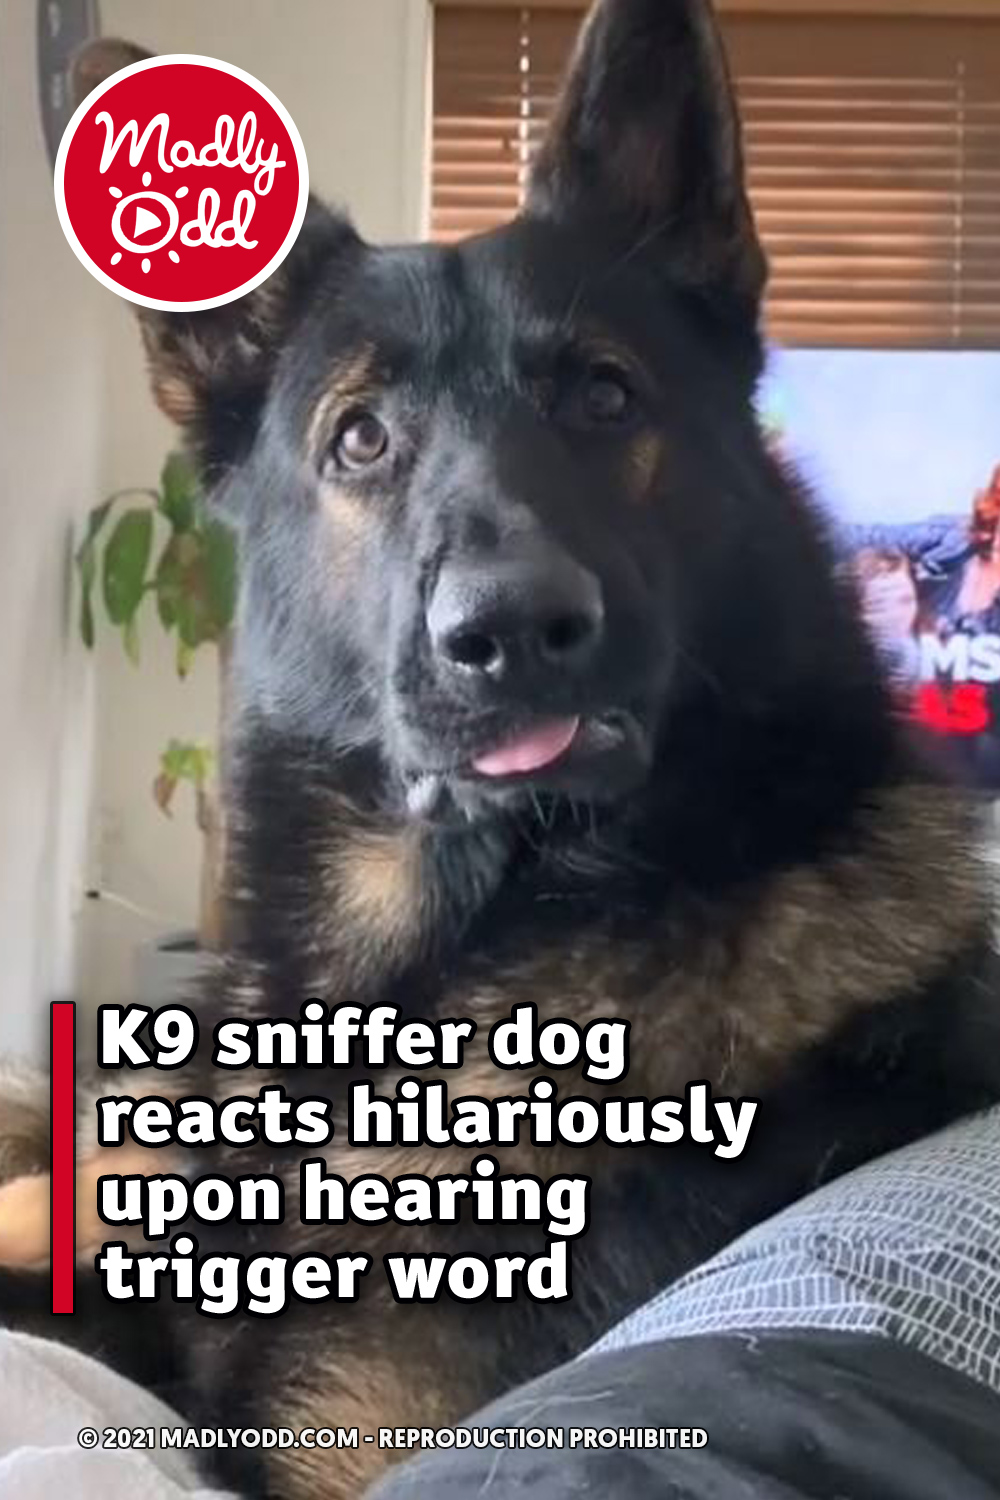 K9 sniffer dog reacts hilariously upon hearing trigger word